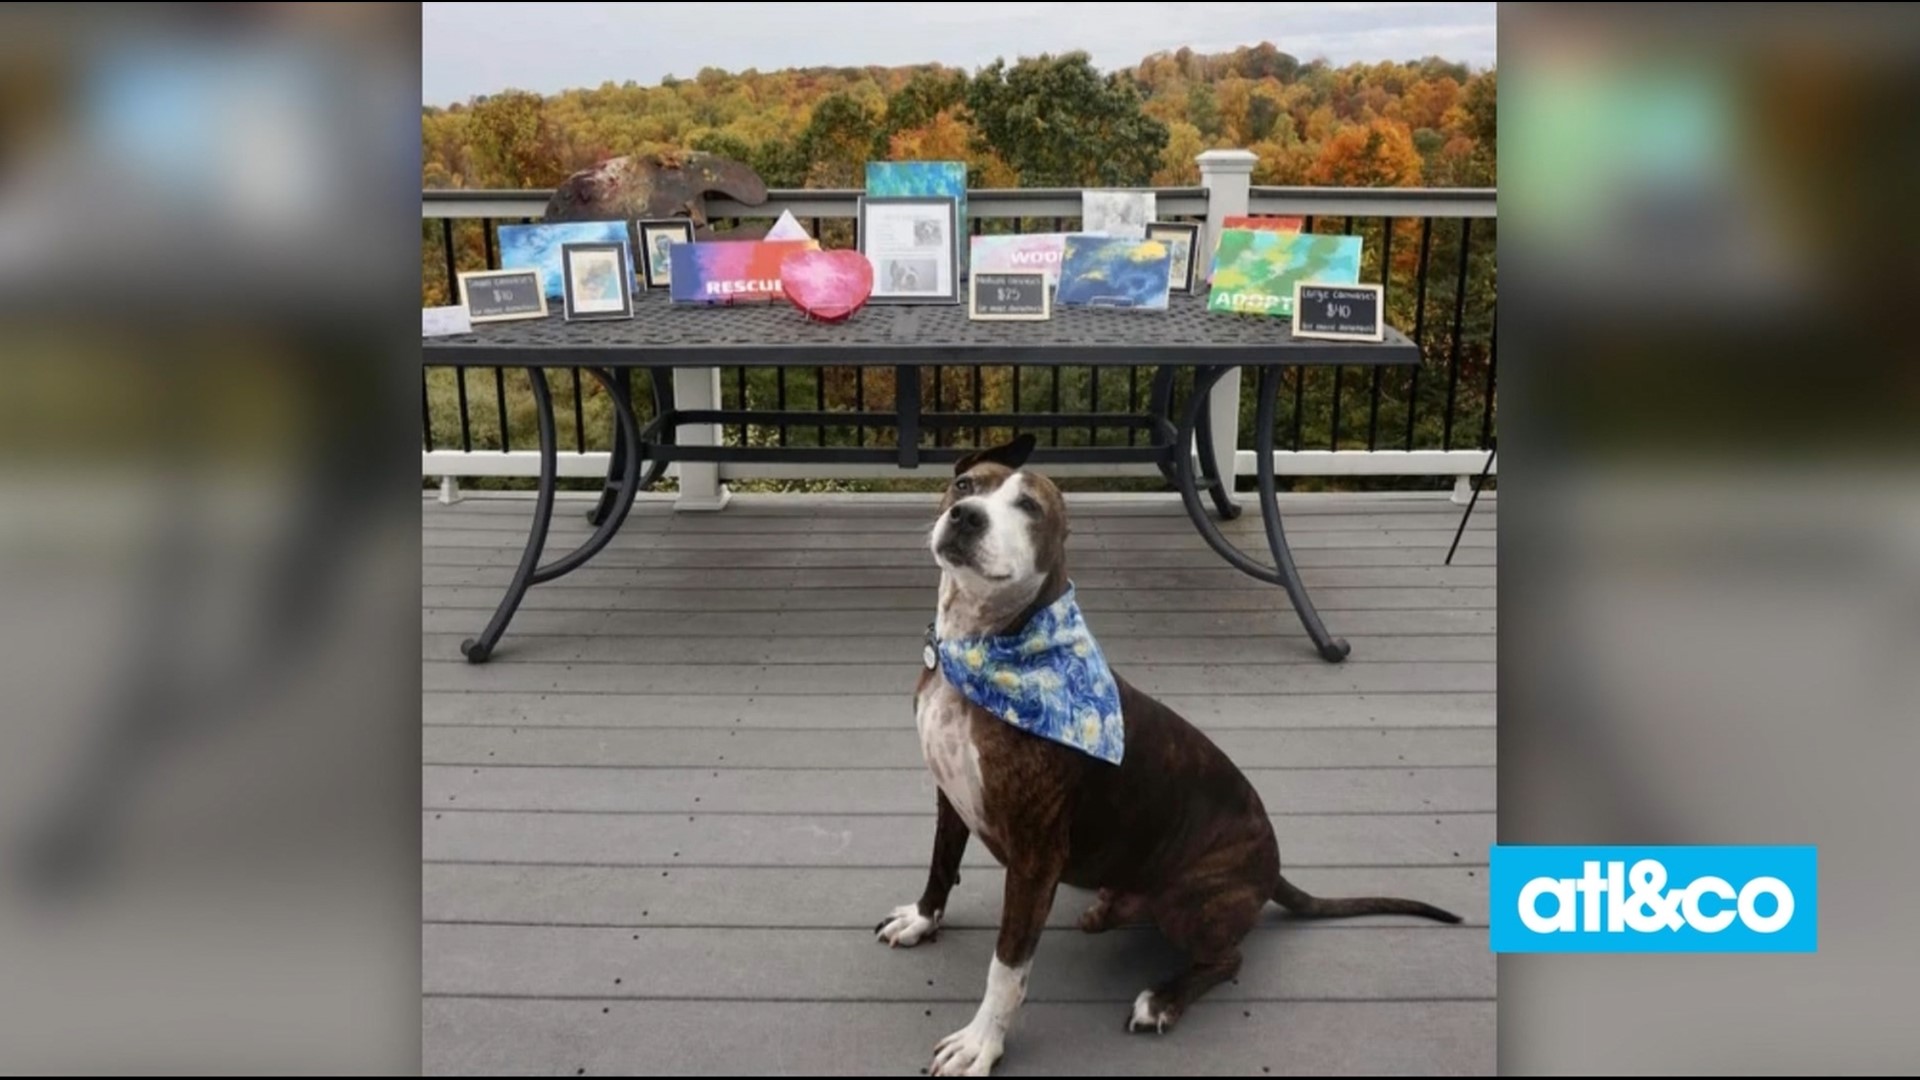 A former bait dog in a dogfighting ring "paints" artwork for charity and is now living his best life up north.